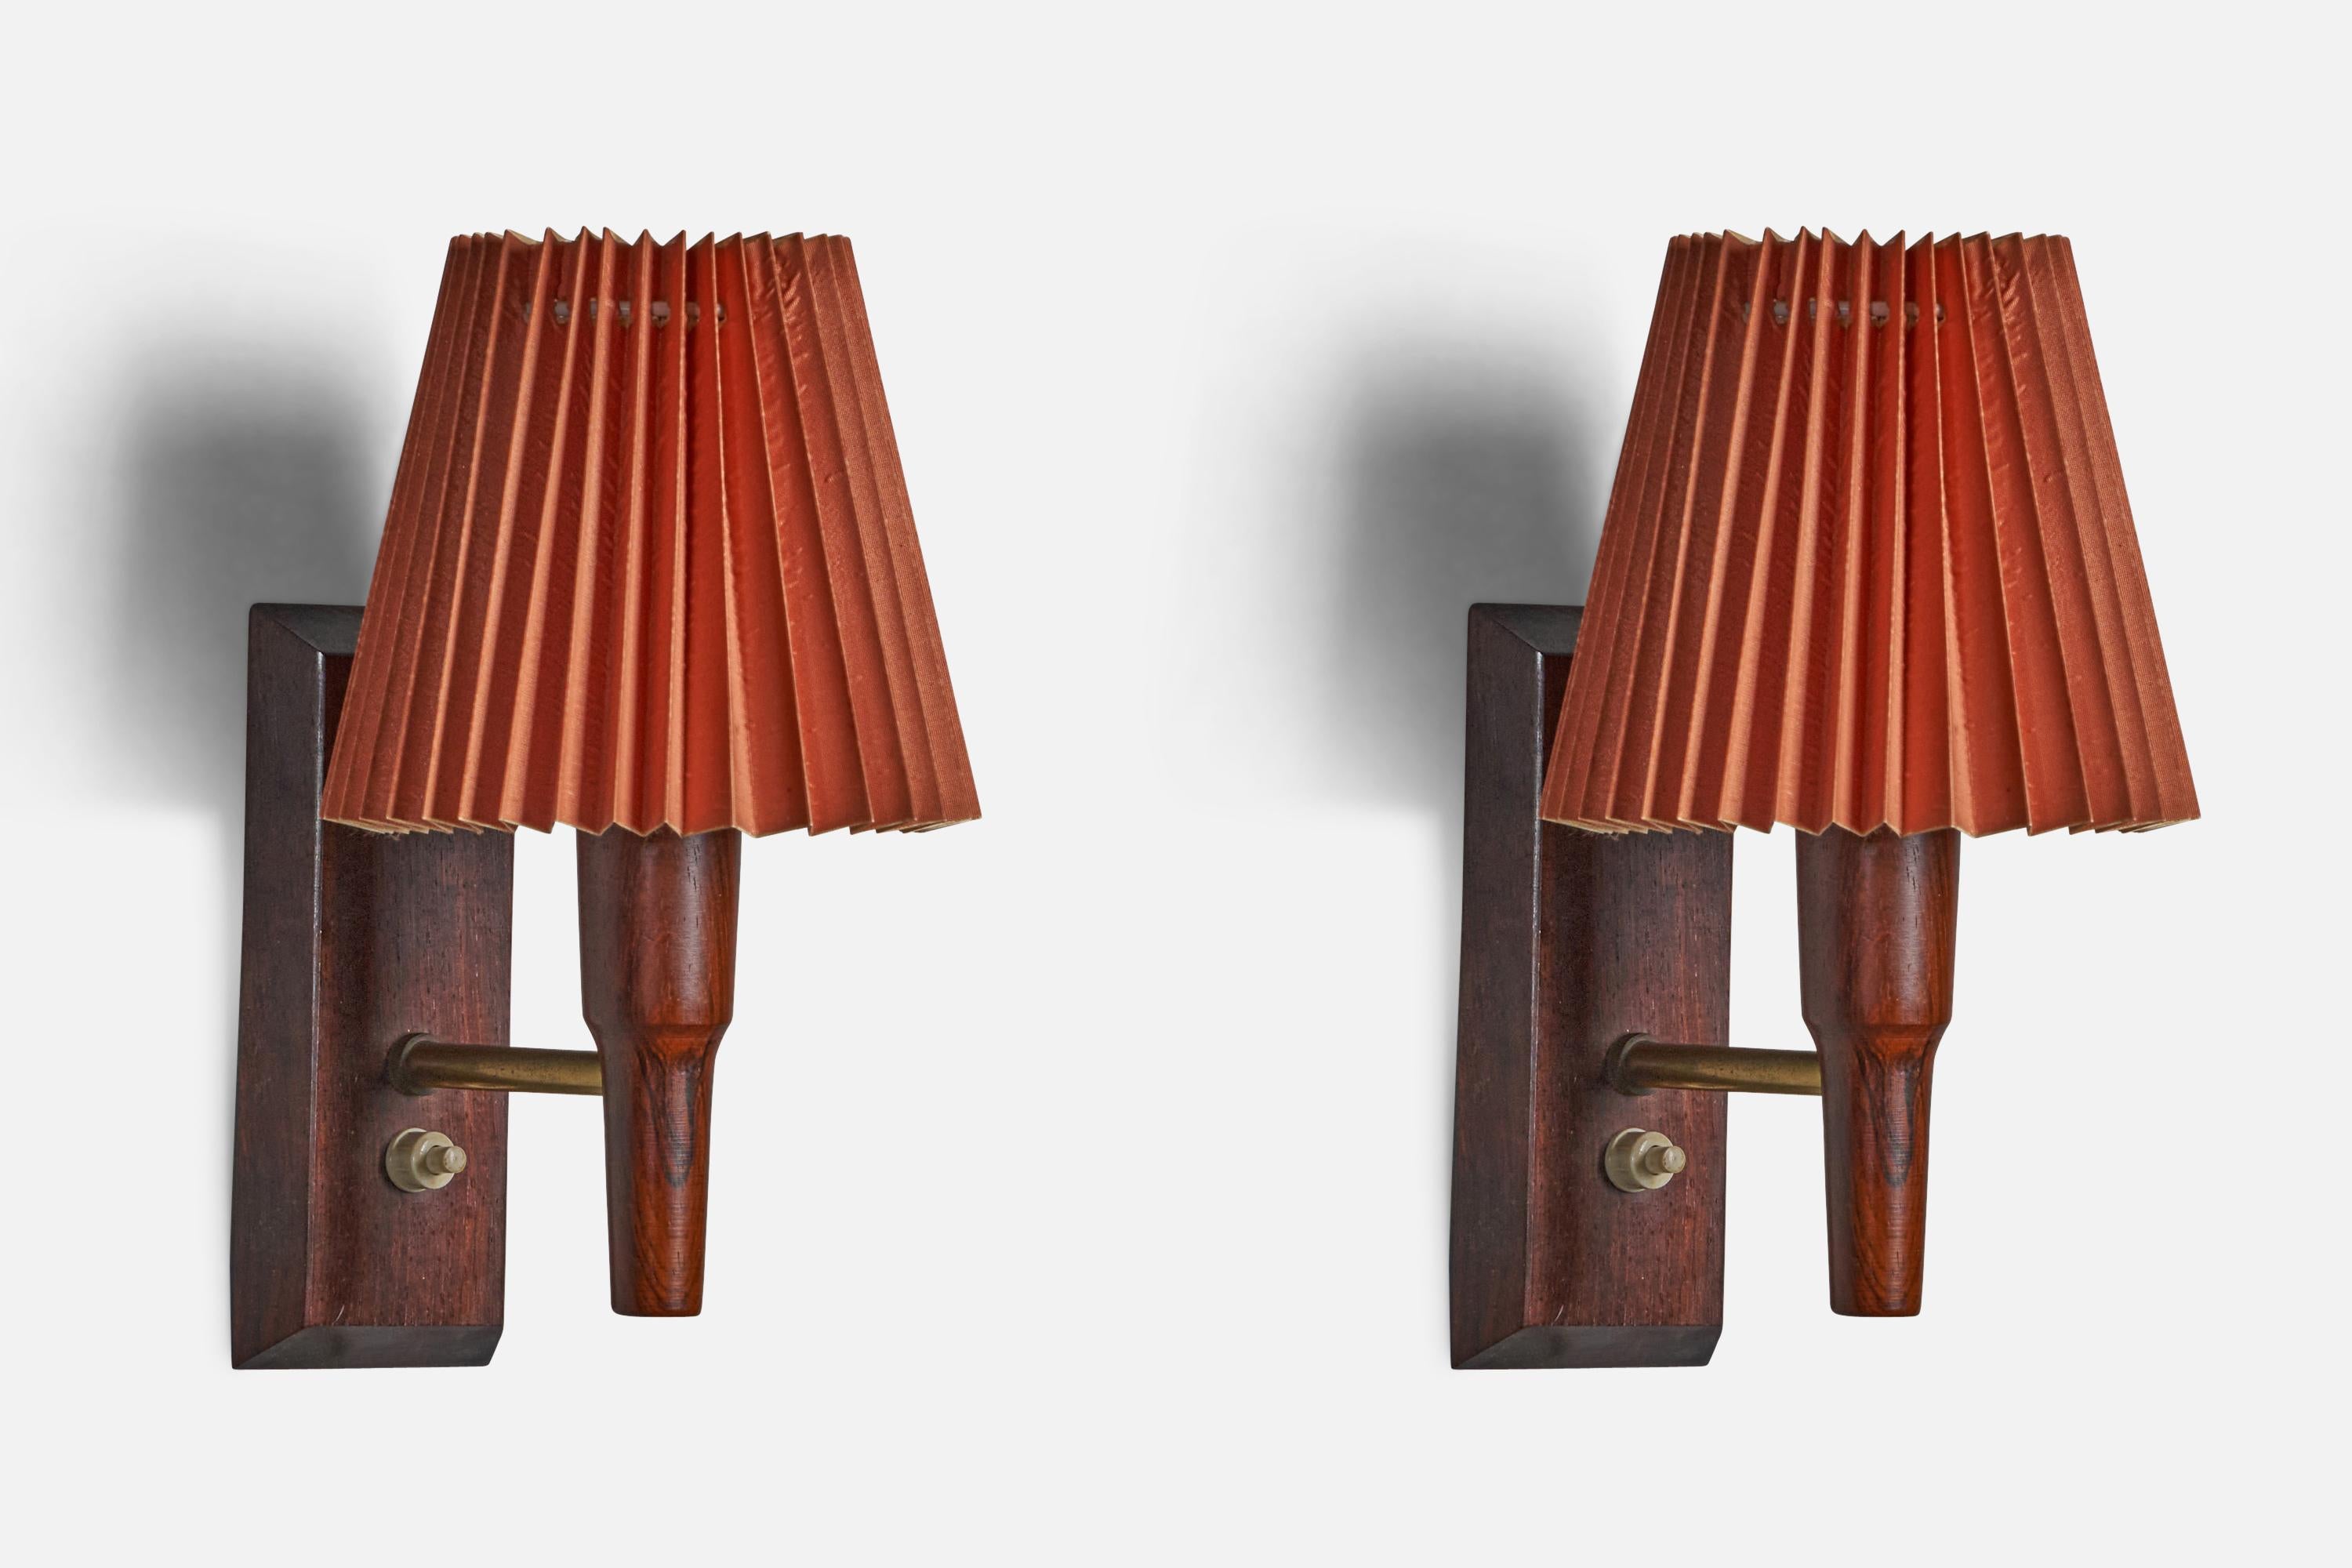 A pair of brass, rosewood and red paper wall lights, Denmark, 1950s

Overall Dimensions (inches): 9.5